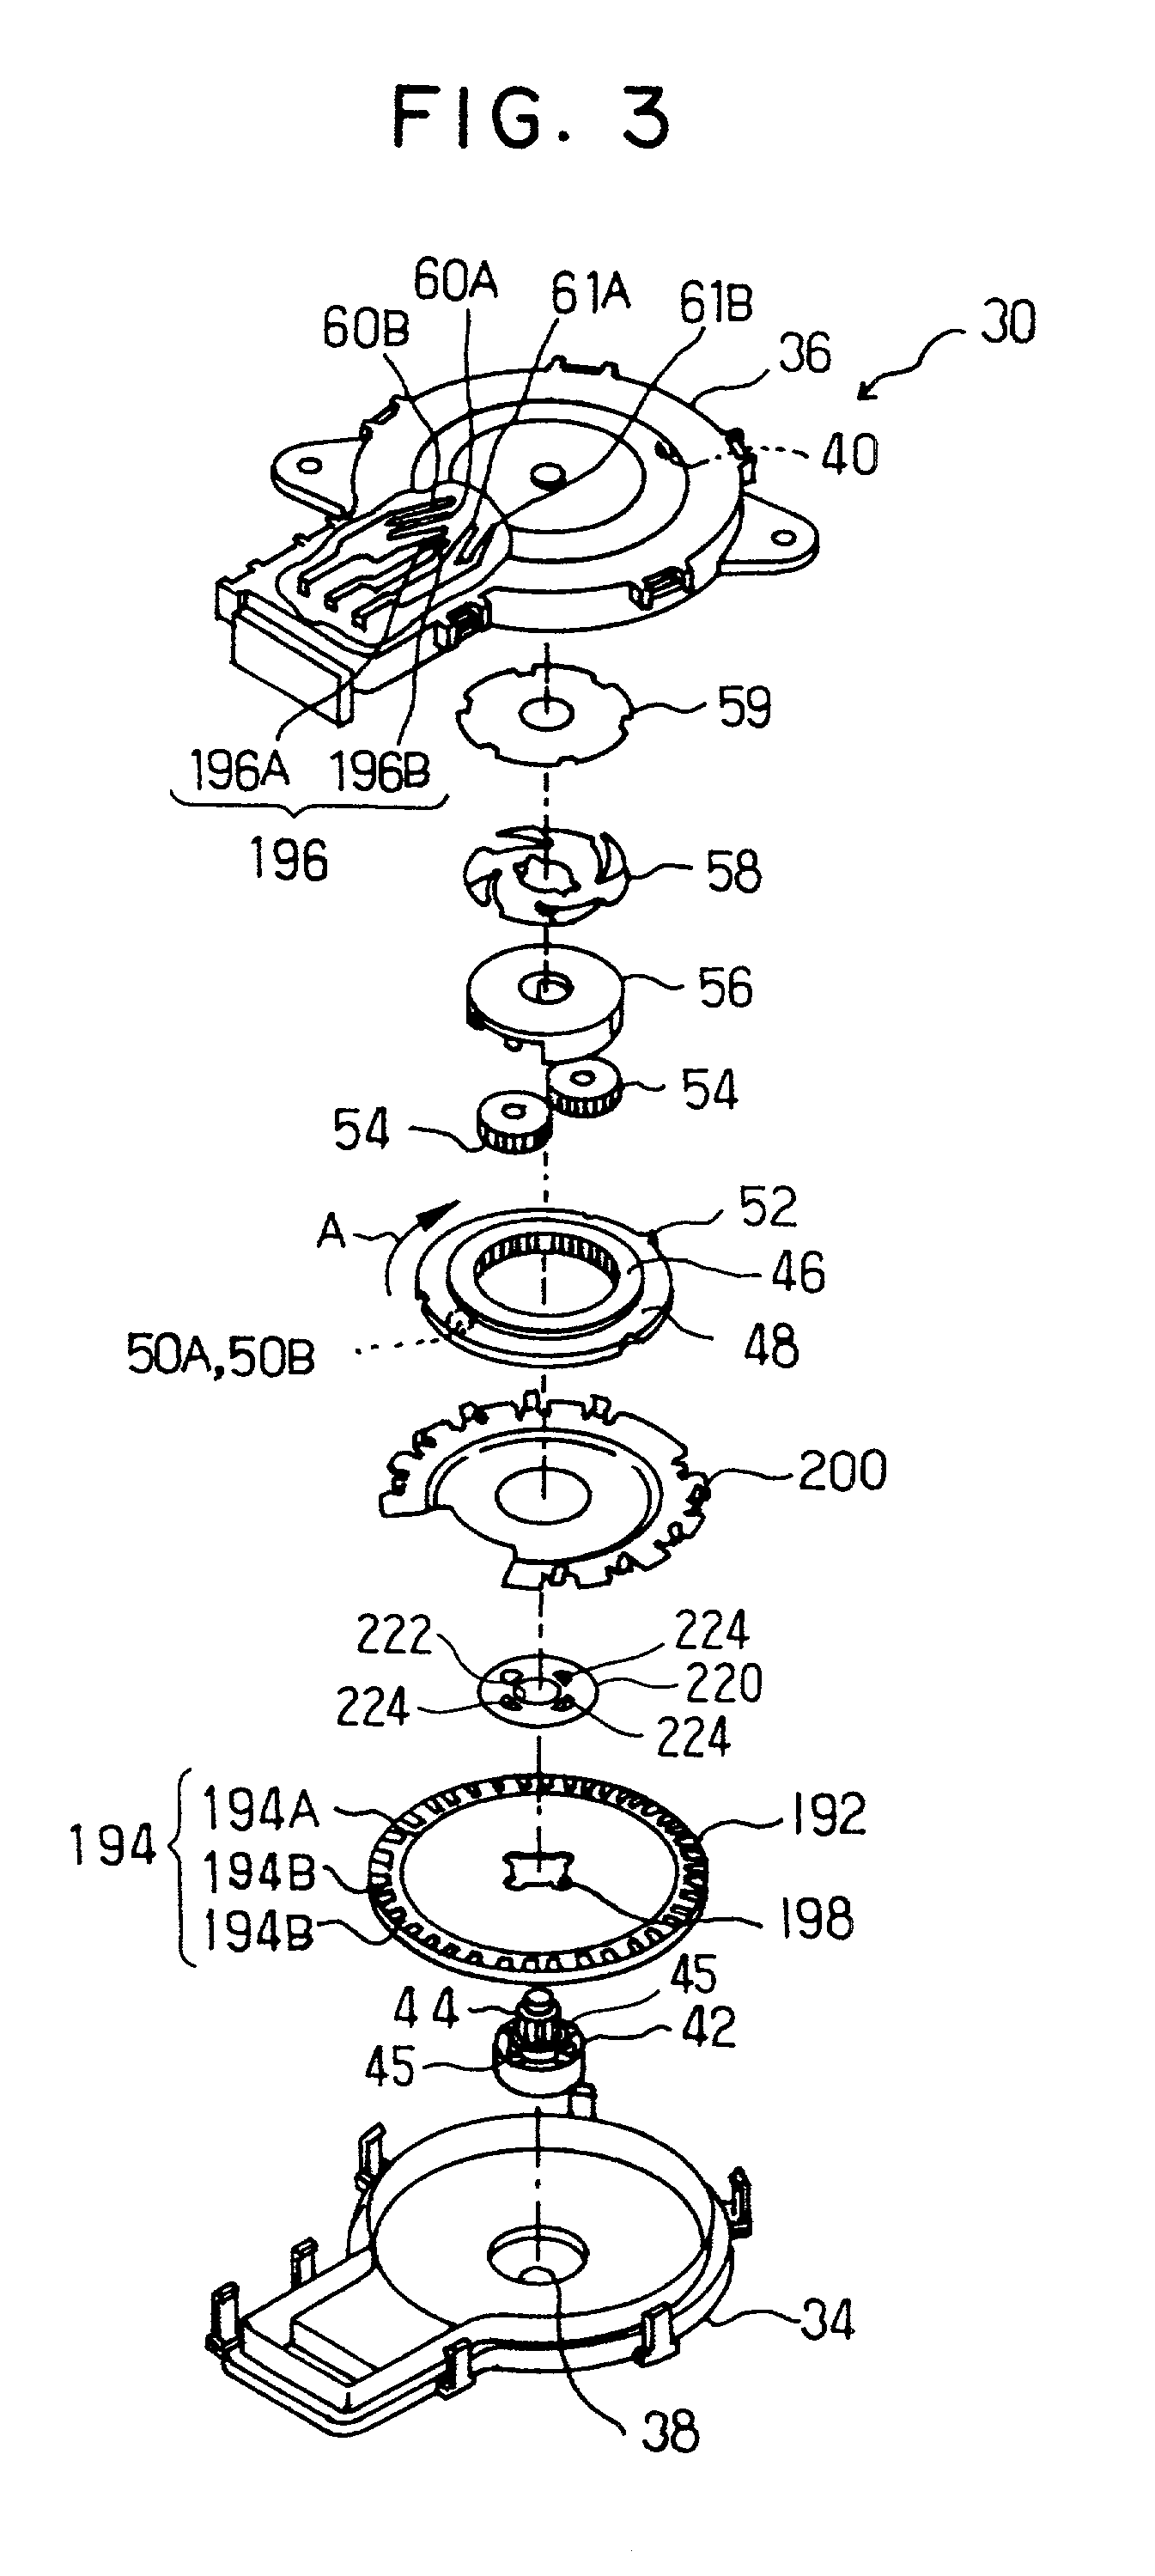 Motor actuator having simplified interfitting connection